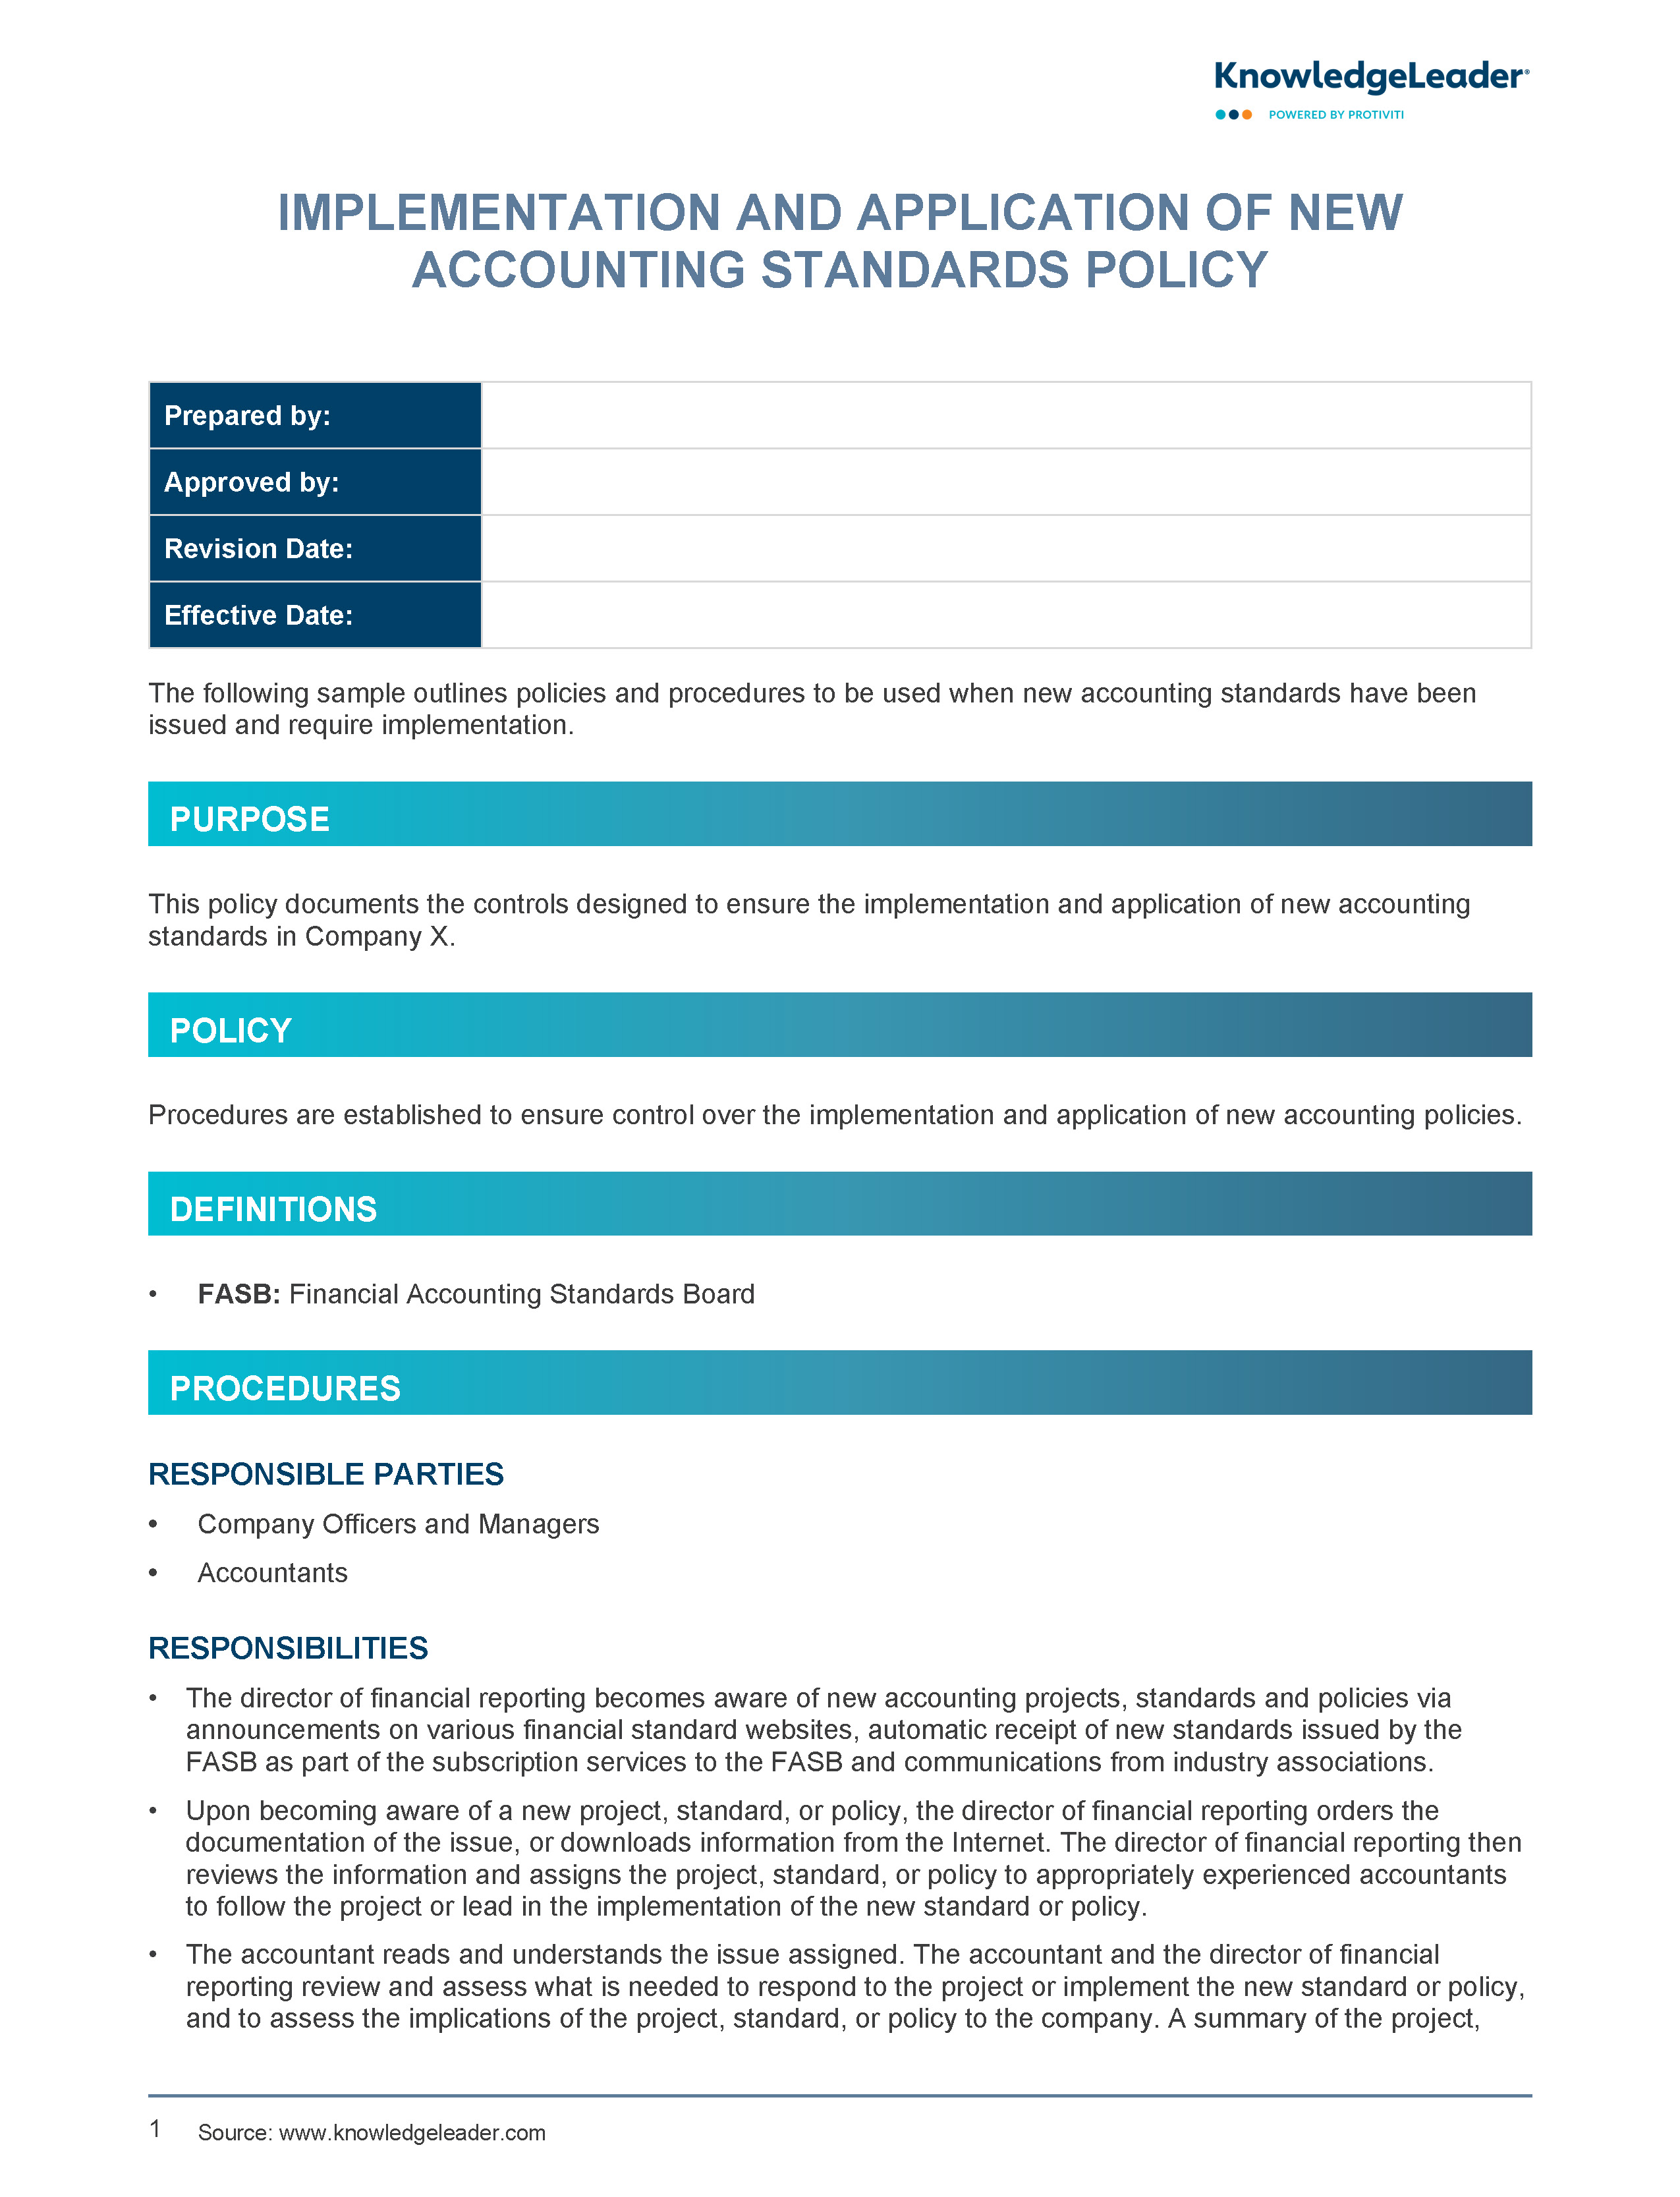 Screenshot of the first page of Implementation and Application of New Accounting Standards Policy